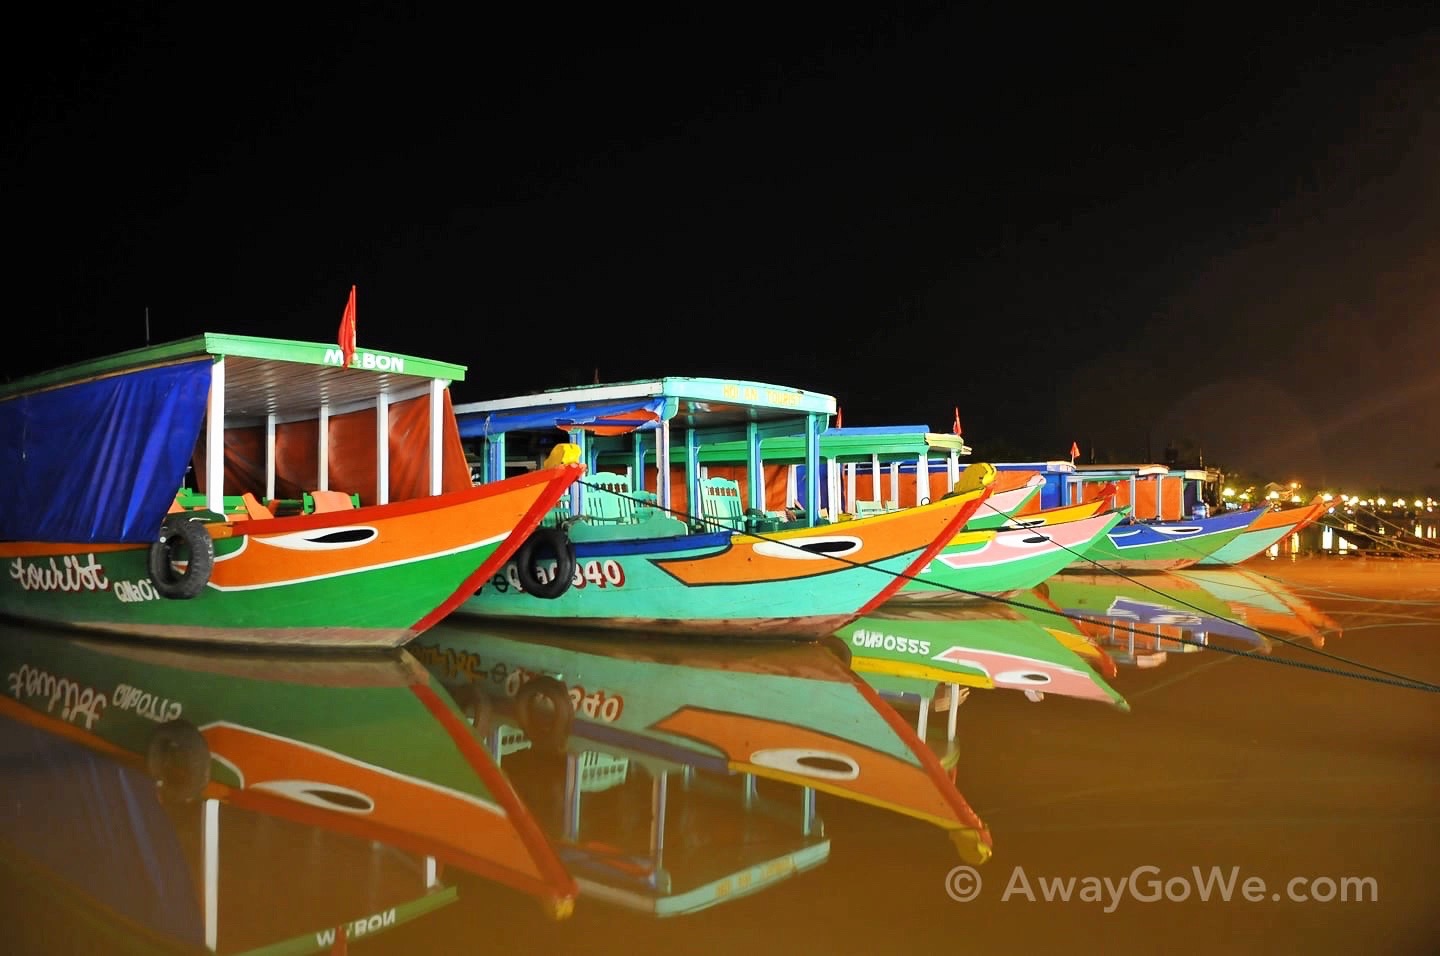 Hoi An Ancient Town colorful boats on the river